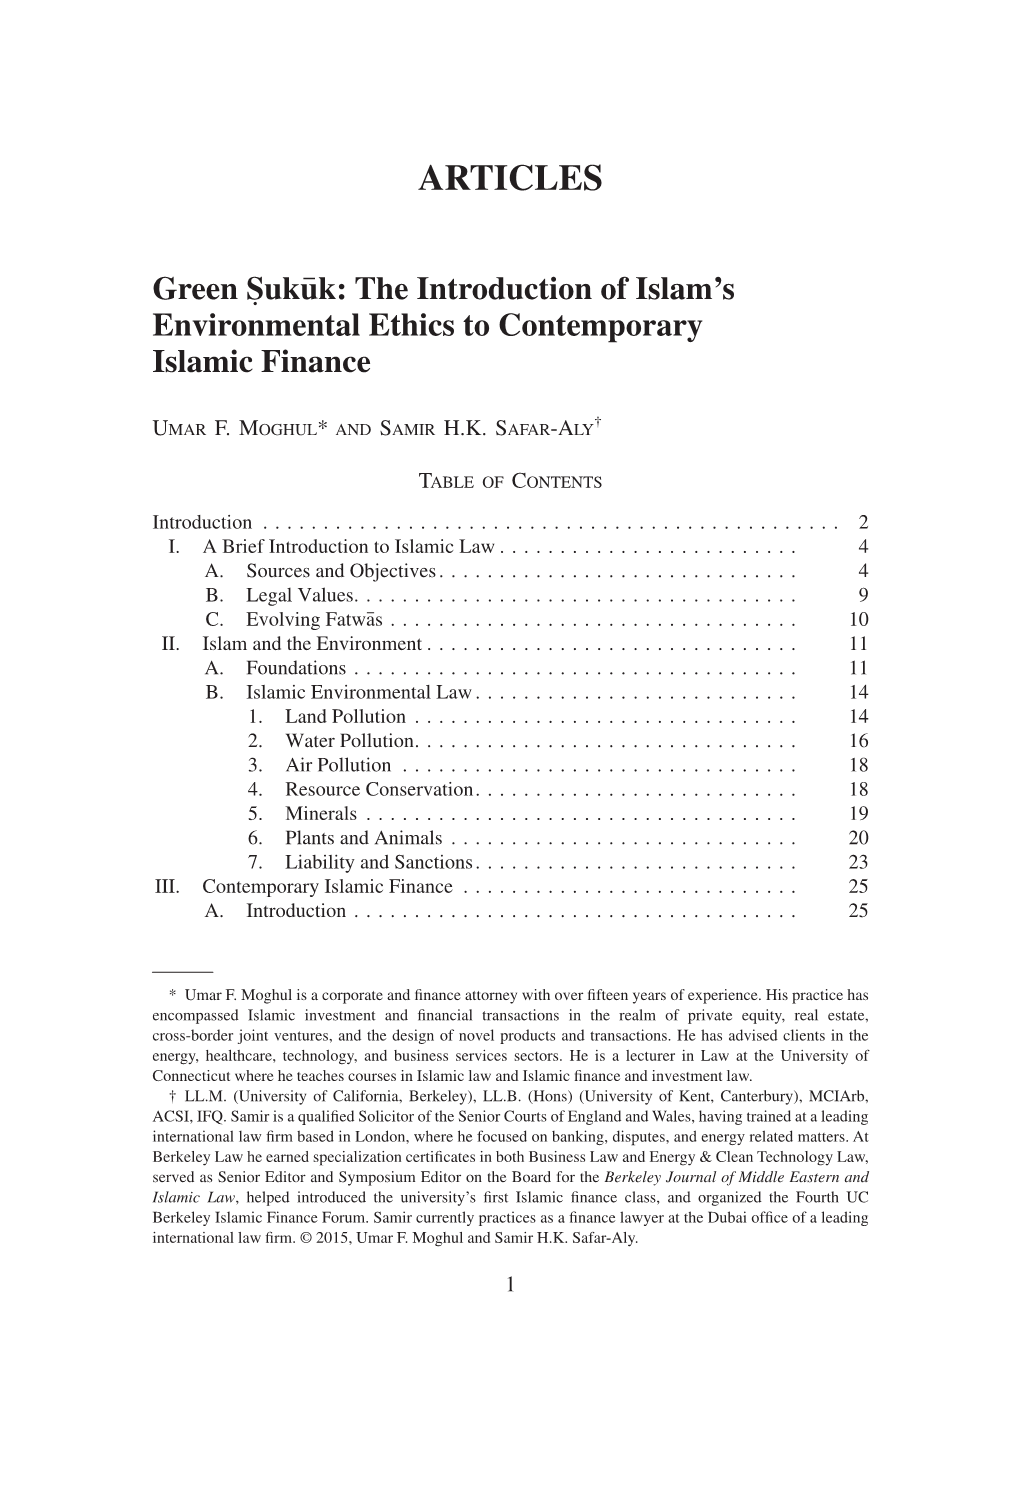 Green Sukuk: the Introduction of Islam's Environmental Ethics to Contemporary Islamic Finance